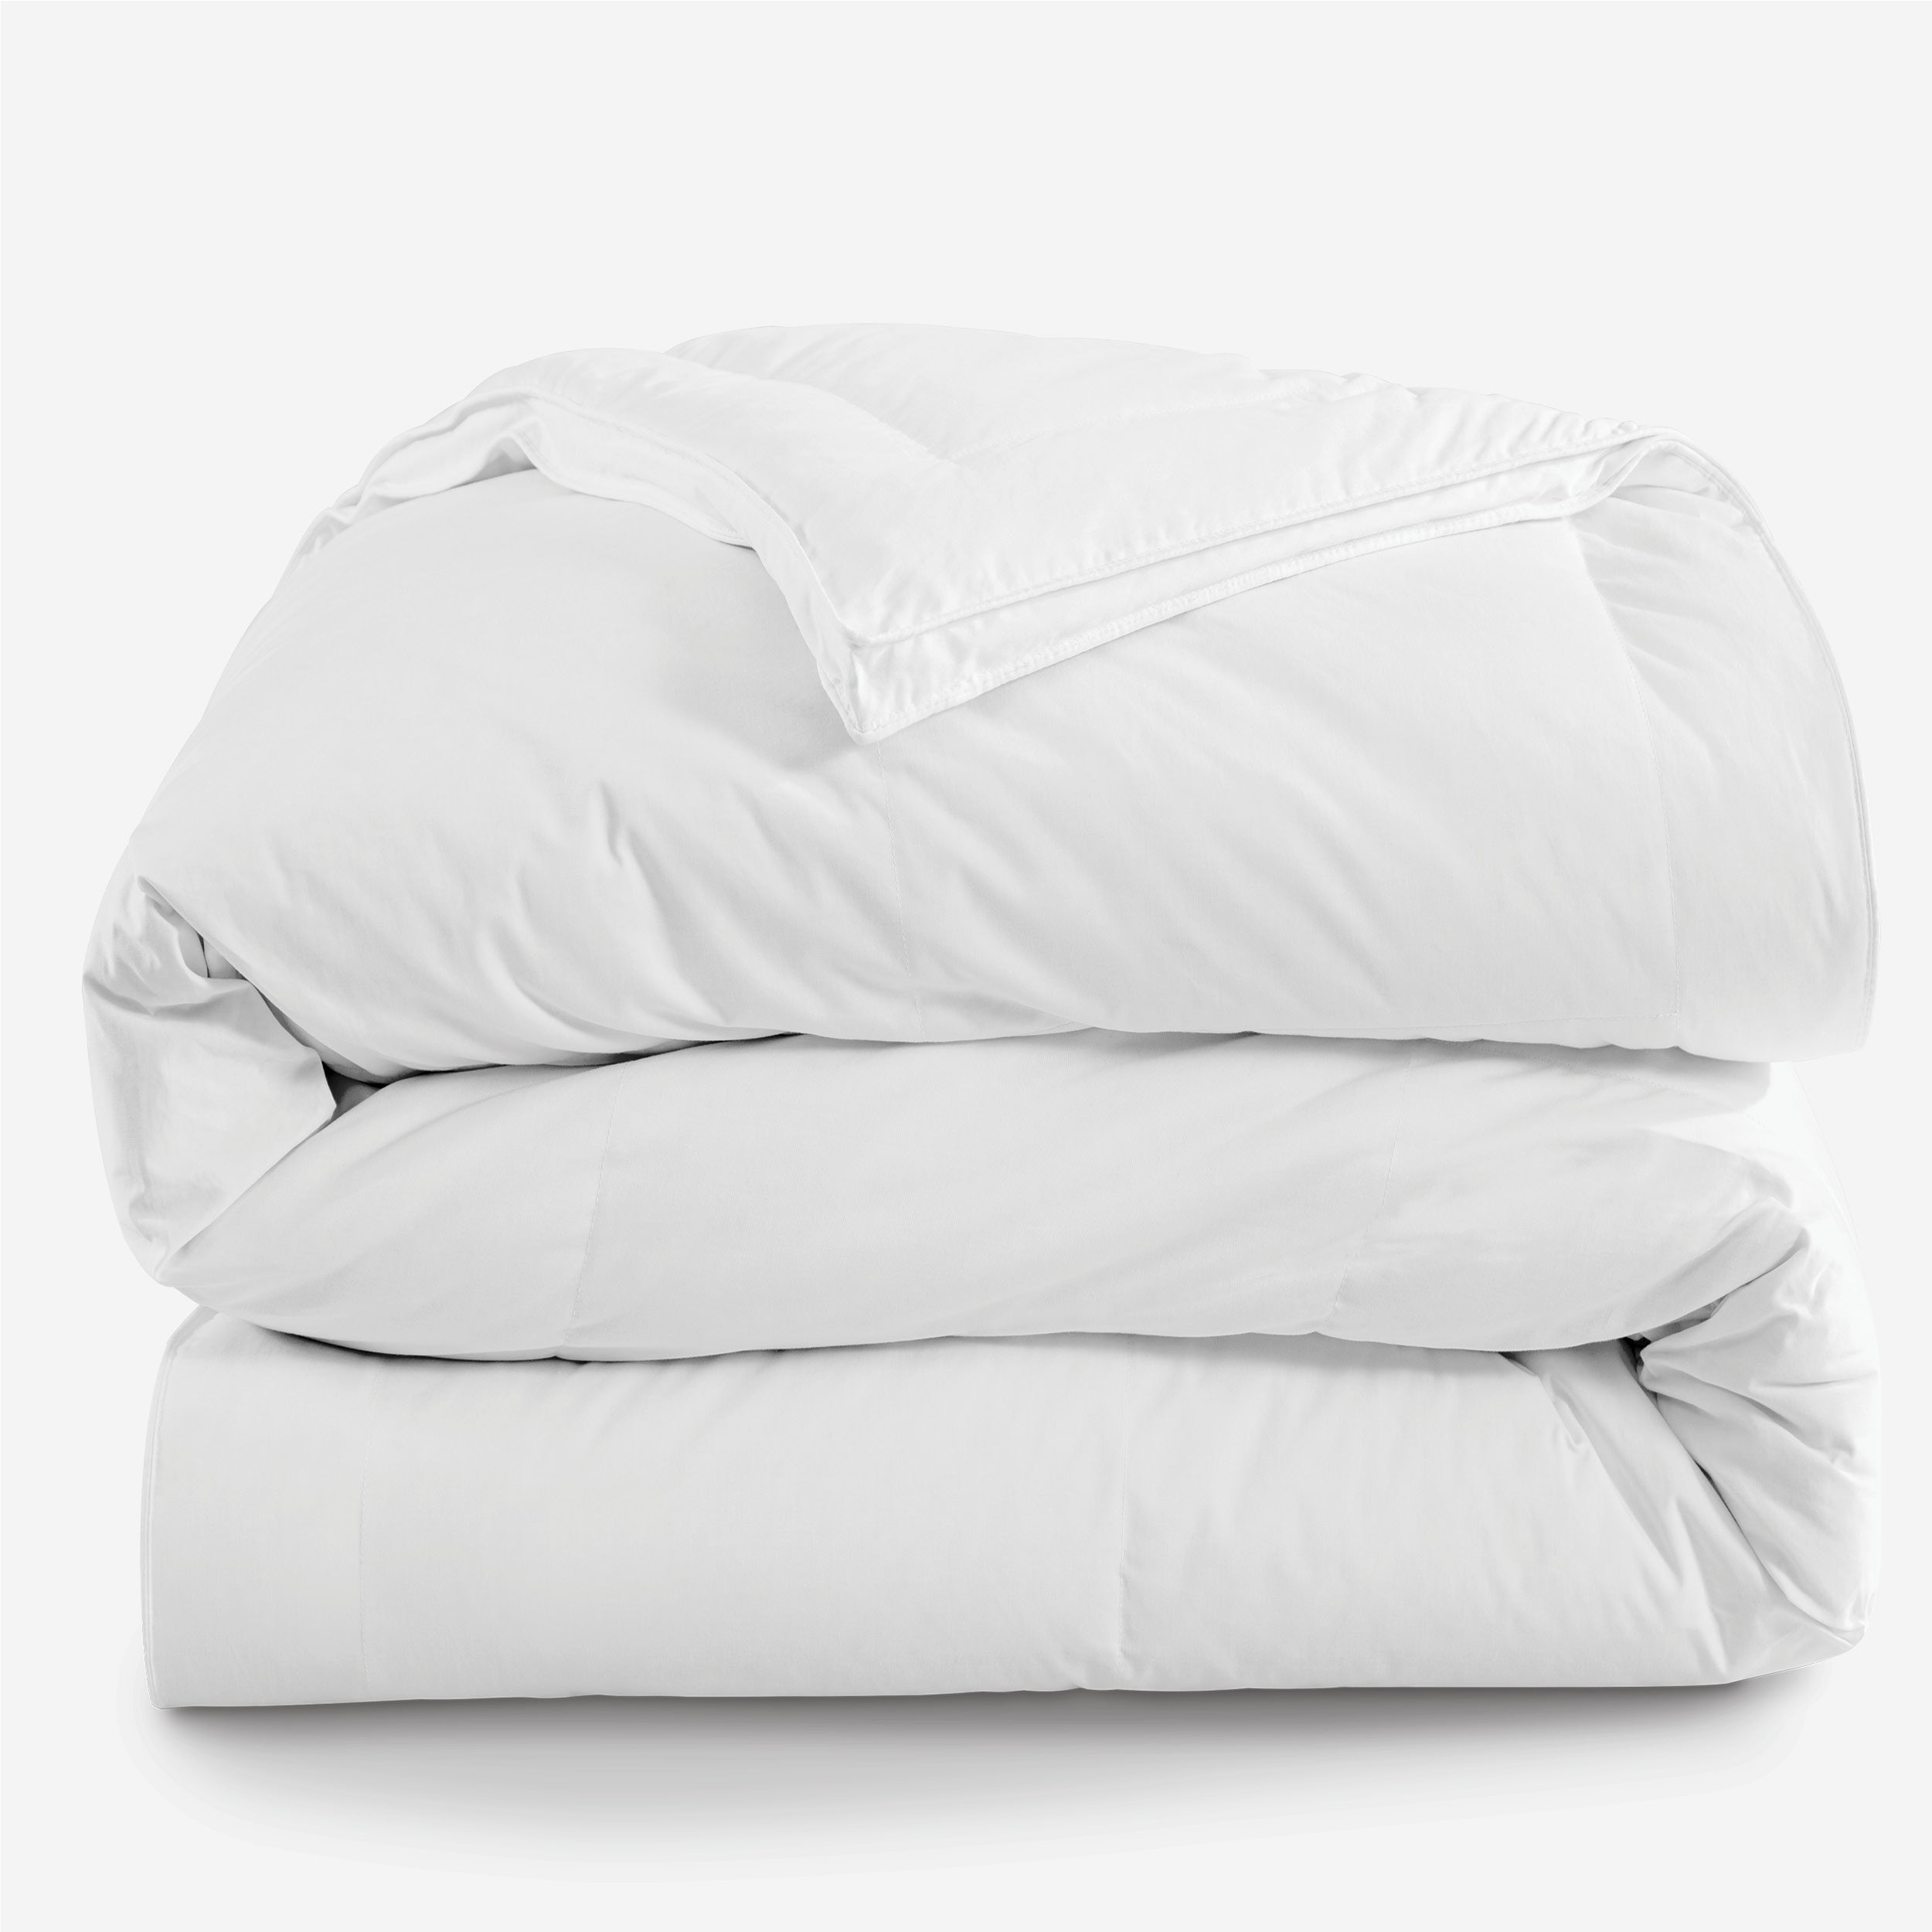 DN_DownComforter_White_CategoryImage.jpg